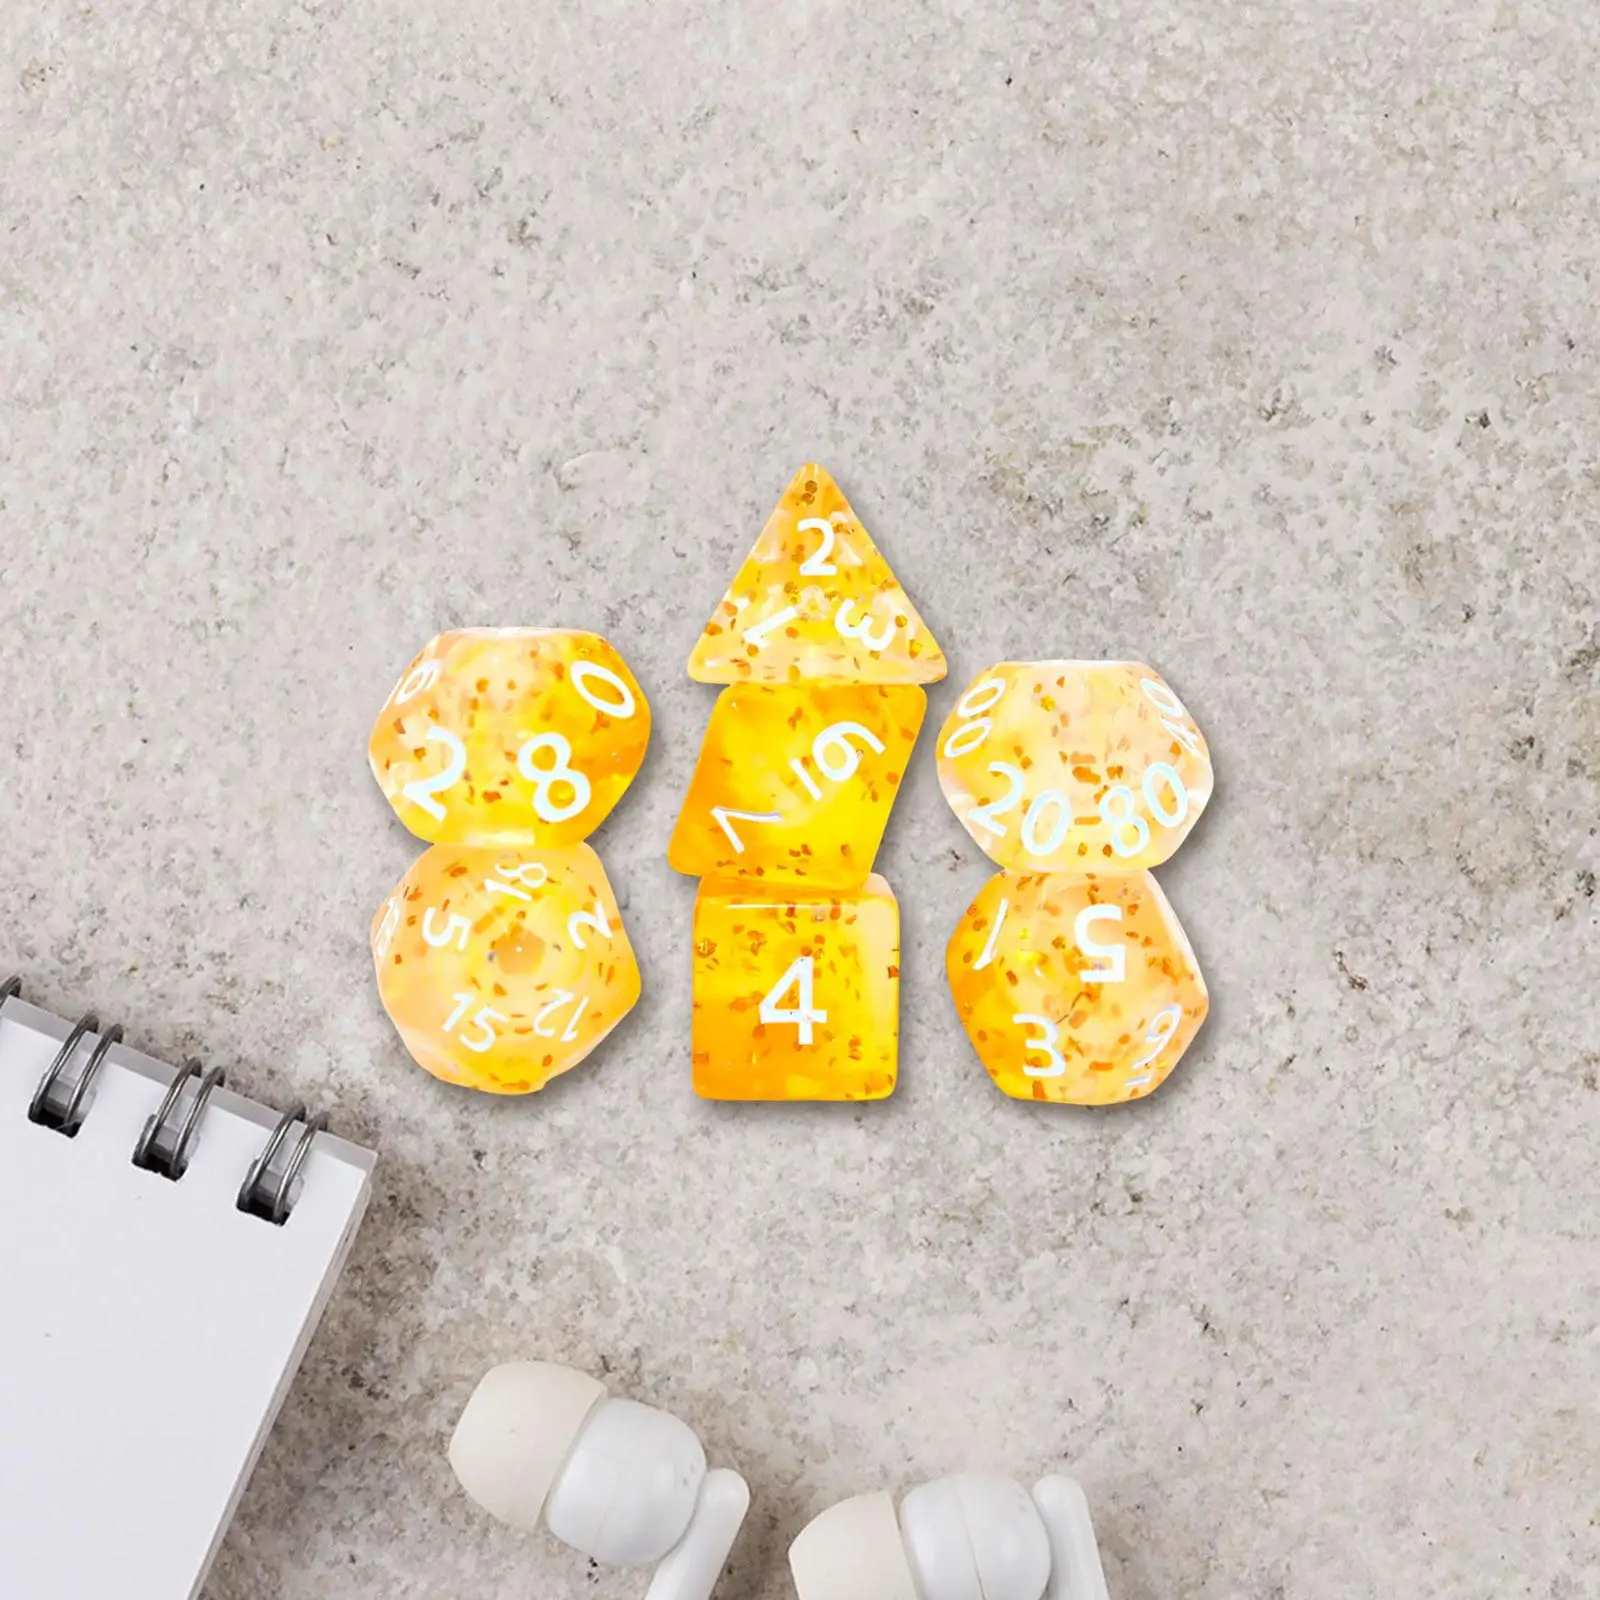 7x Acrylic Polyhedral Dices Set D4-D20 Multi Sided Dices Kids Math Teaching Aids